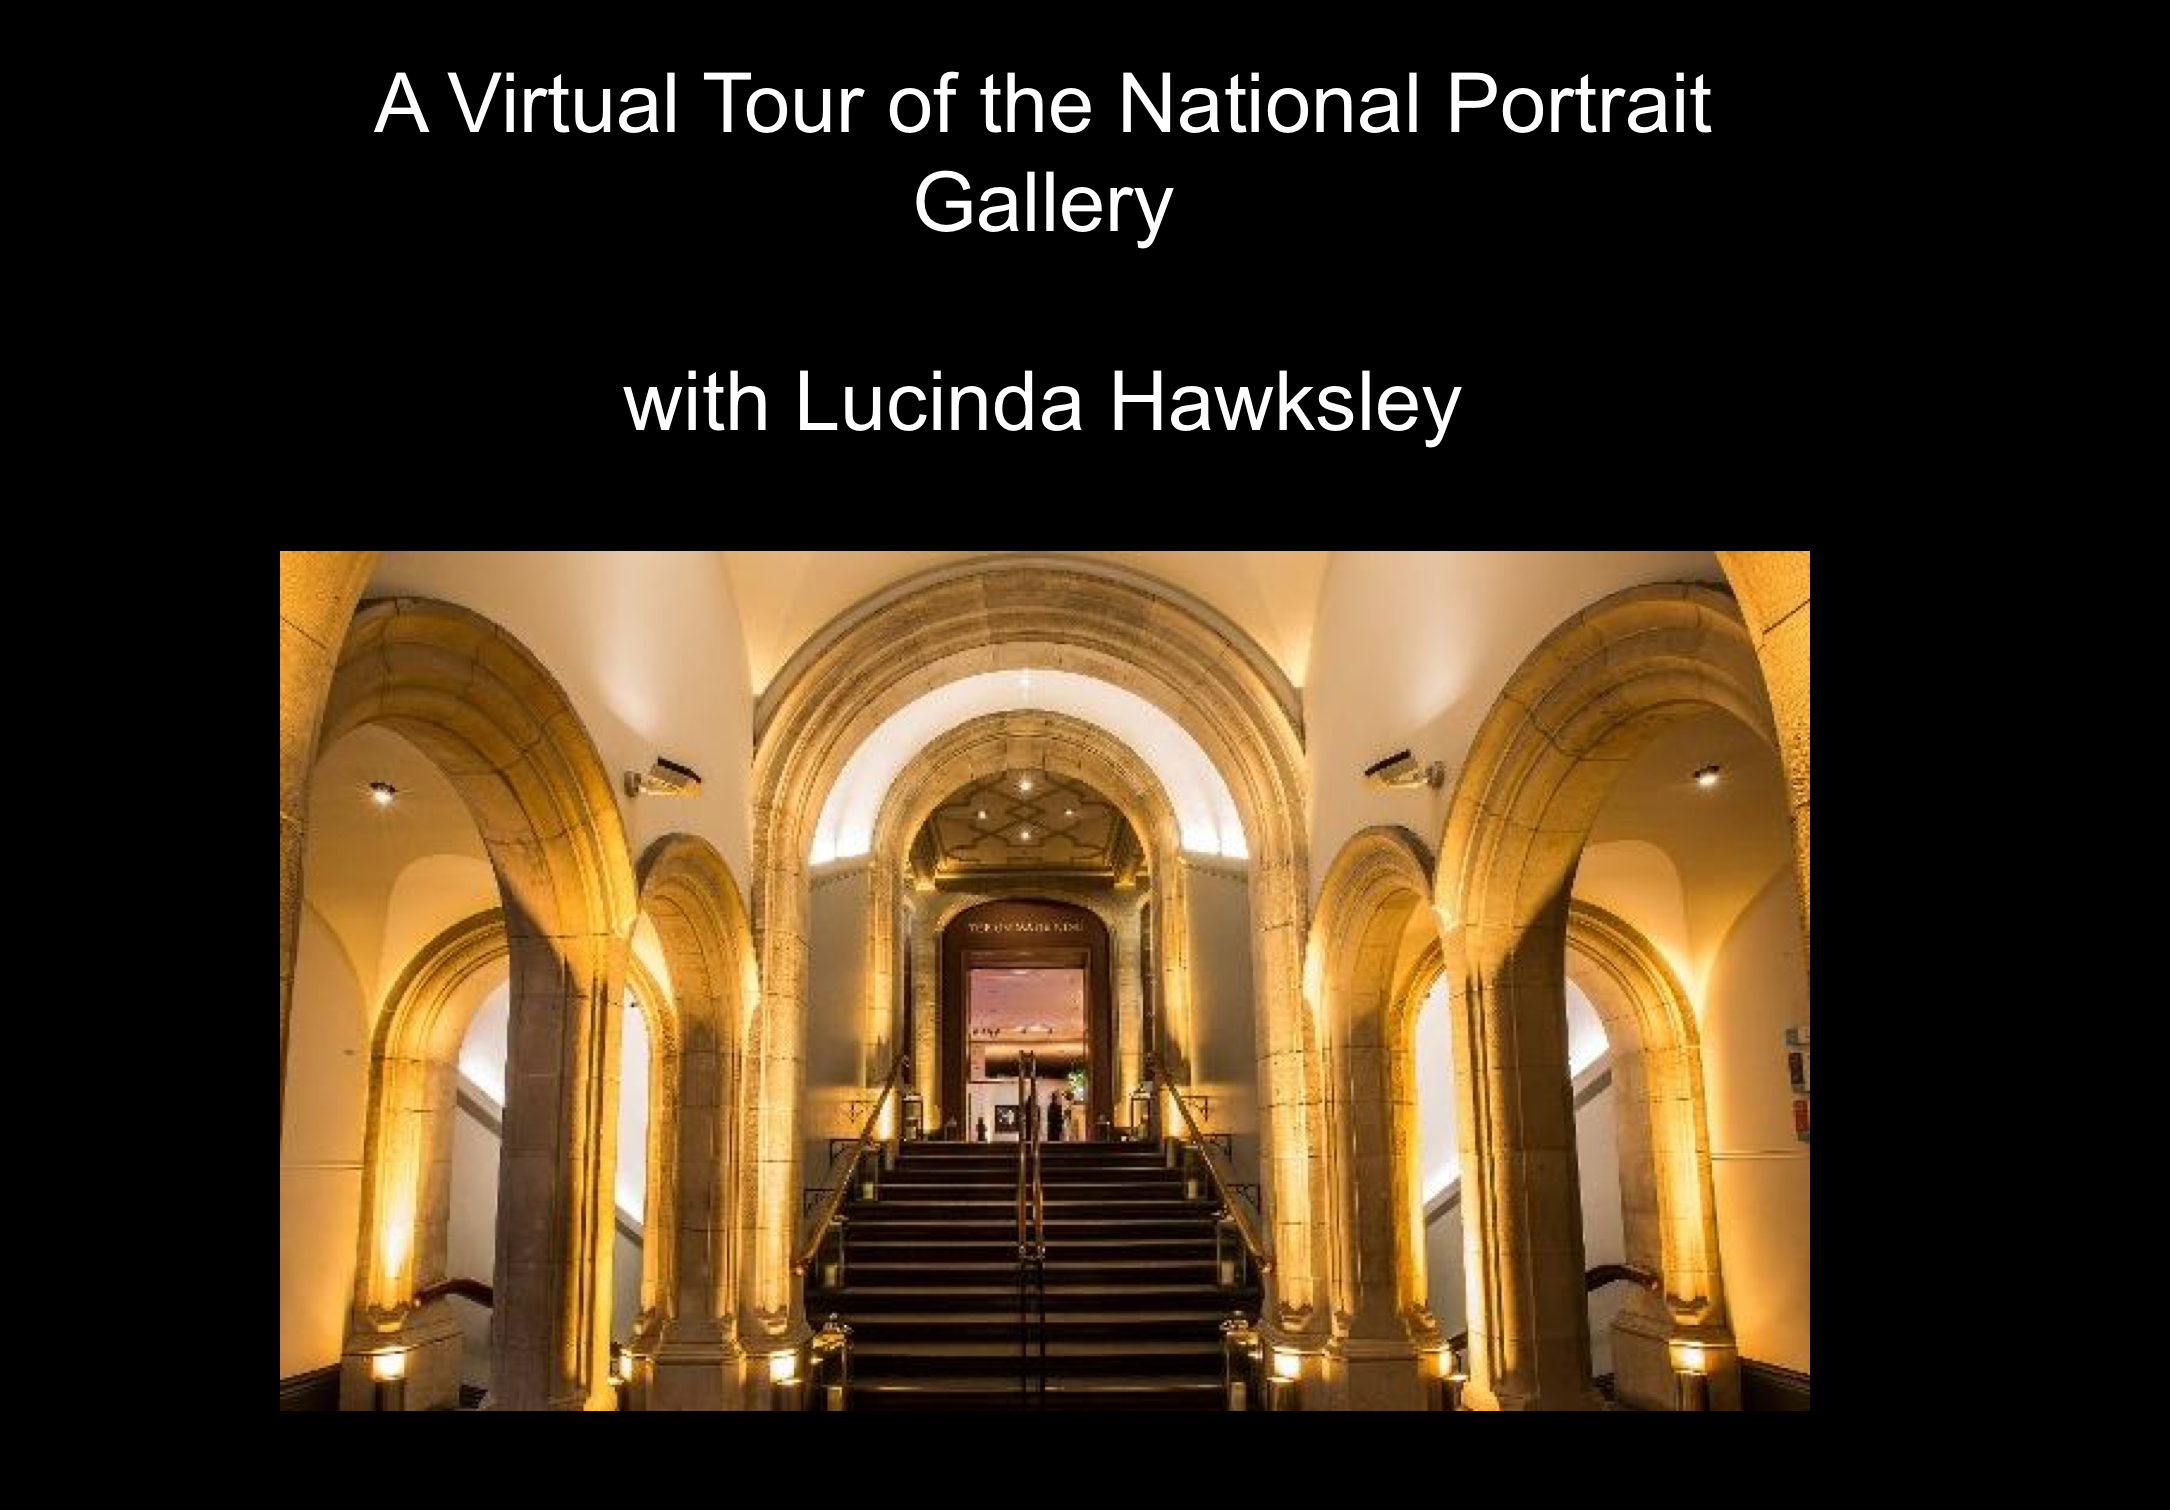  for my lecture: A Virtual Tour of the National Portrait Gallery in London. 